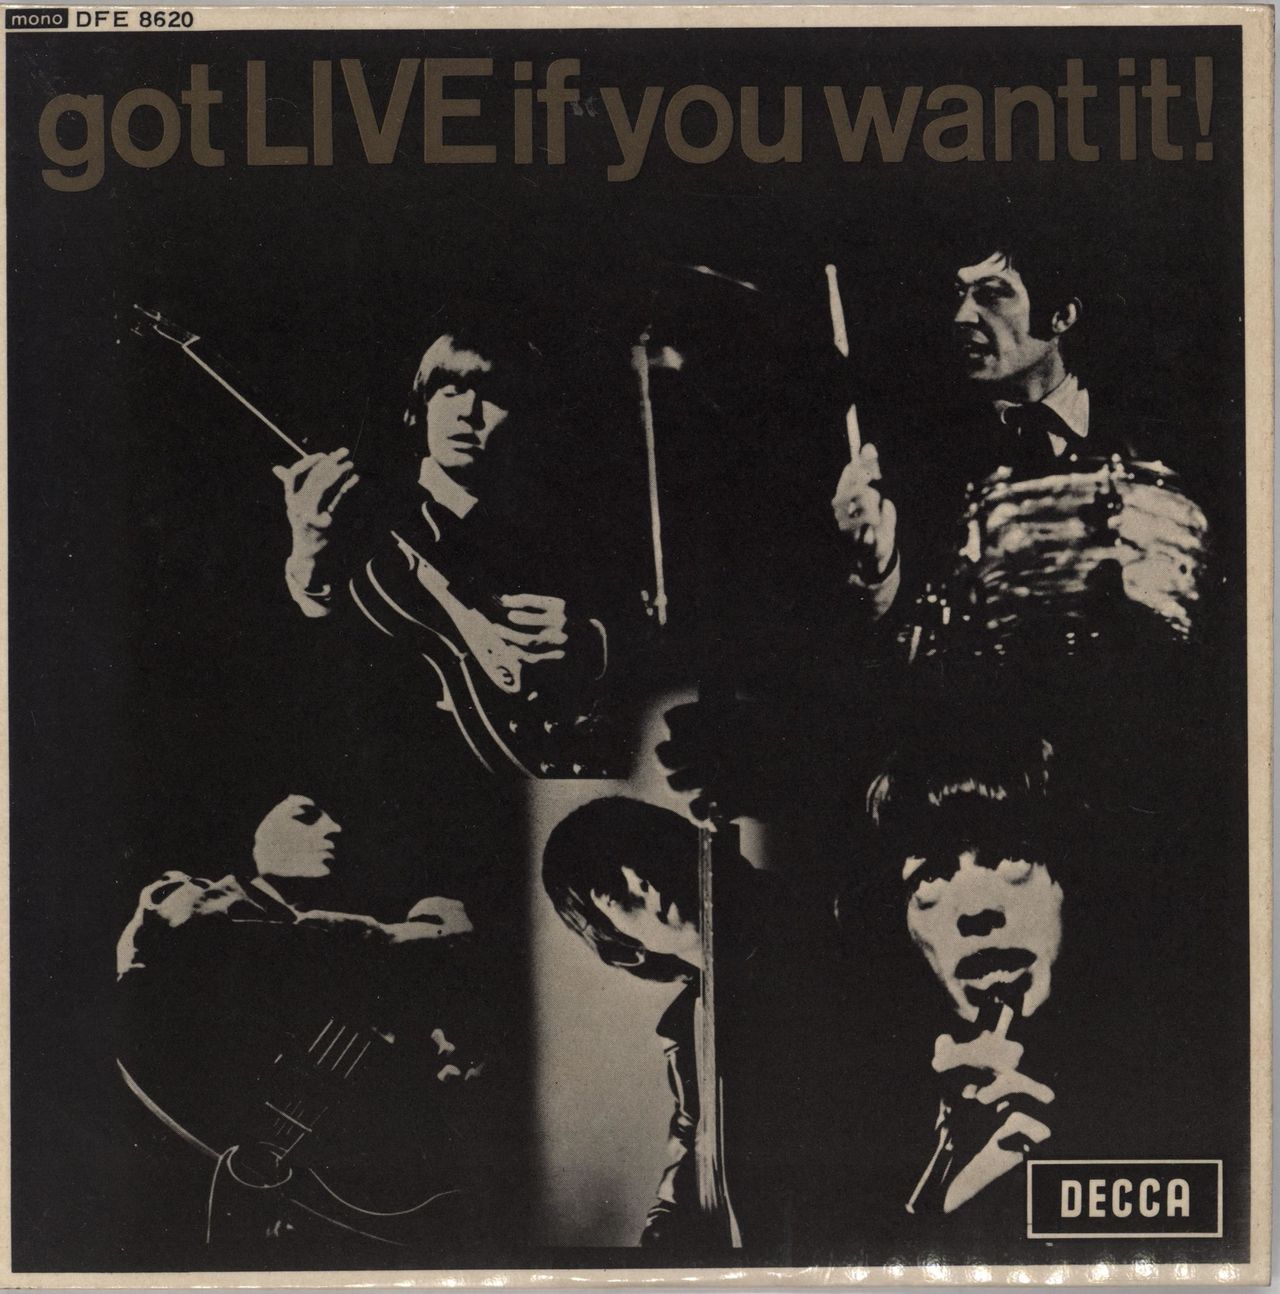 The Rolling Stones Got Live If You Want It EP - 1st - WOL UK 7" vinyl single (7 inch record / 45) DFE8620